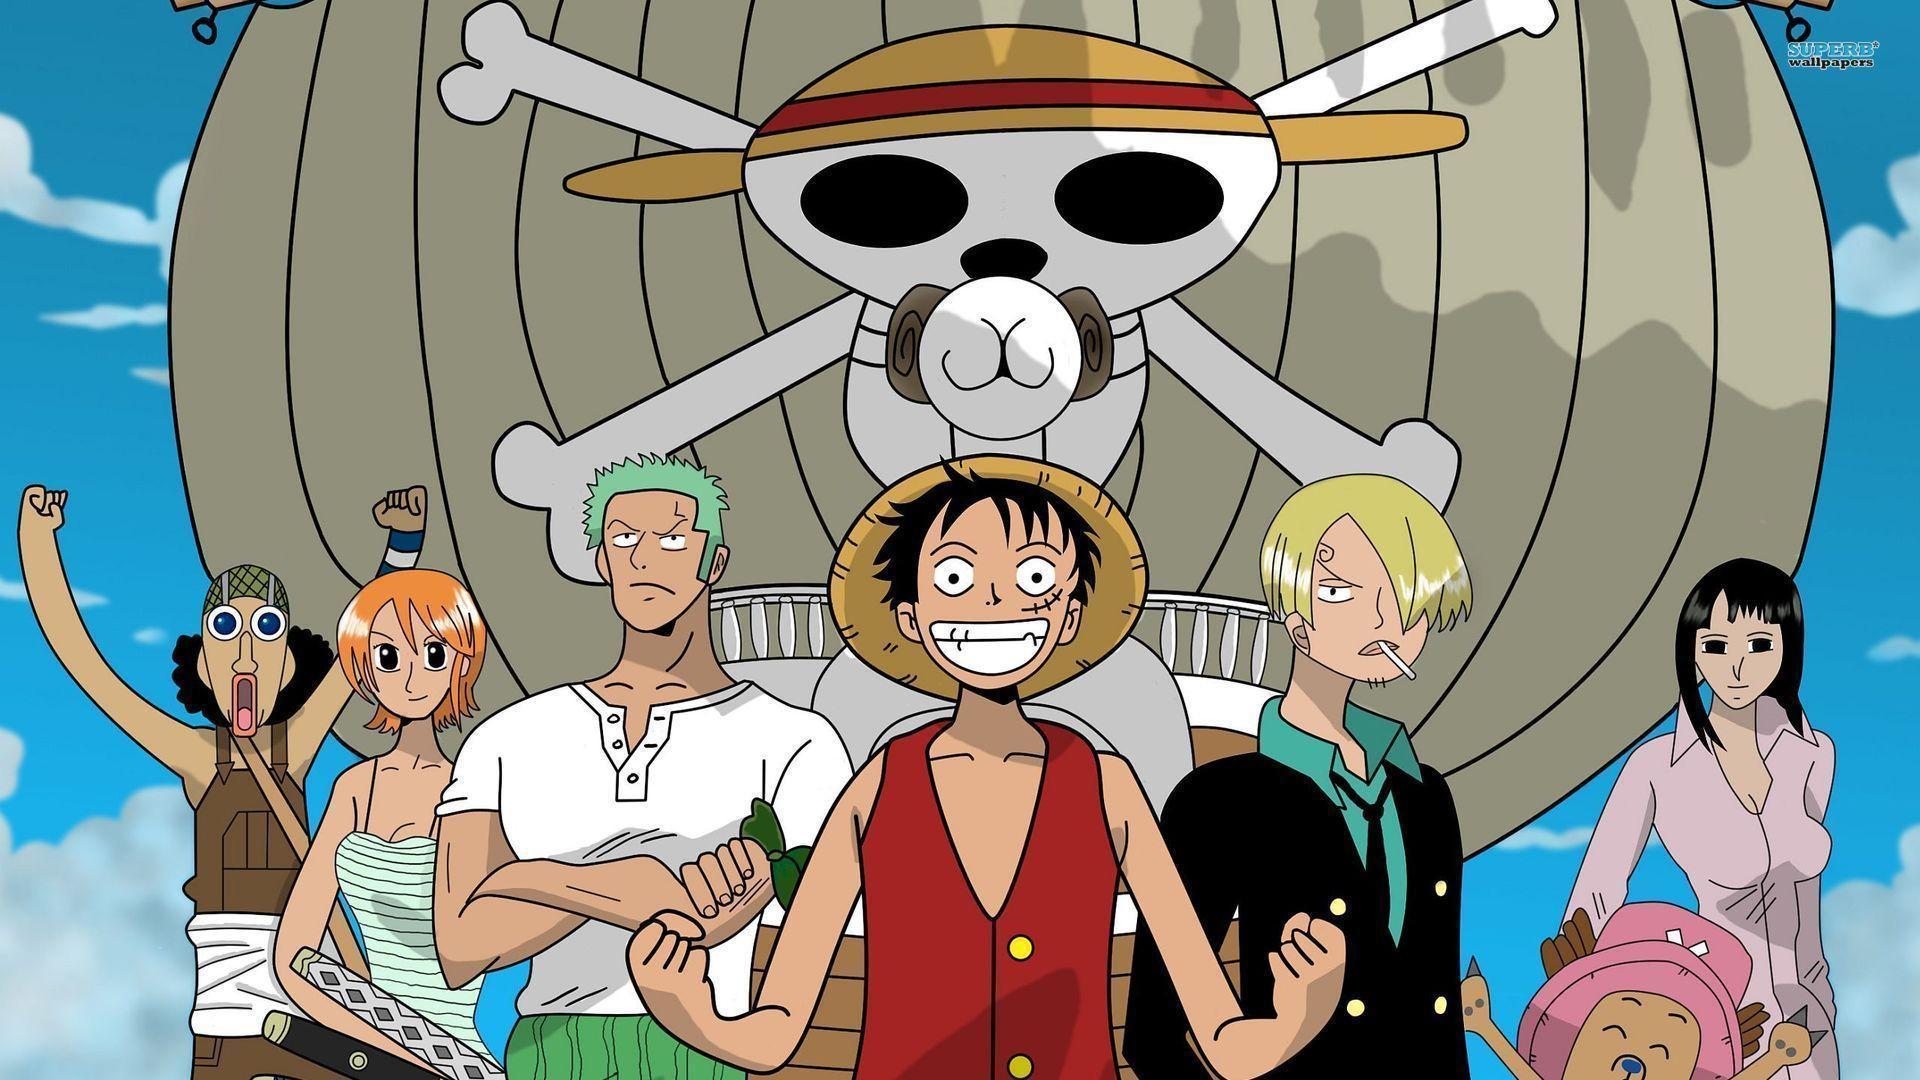 Unique One Piece Anime Hd Wallpaper For Android Pics